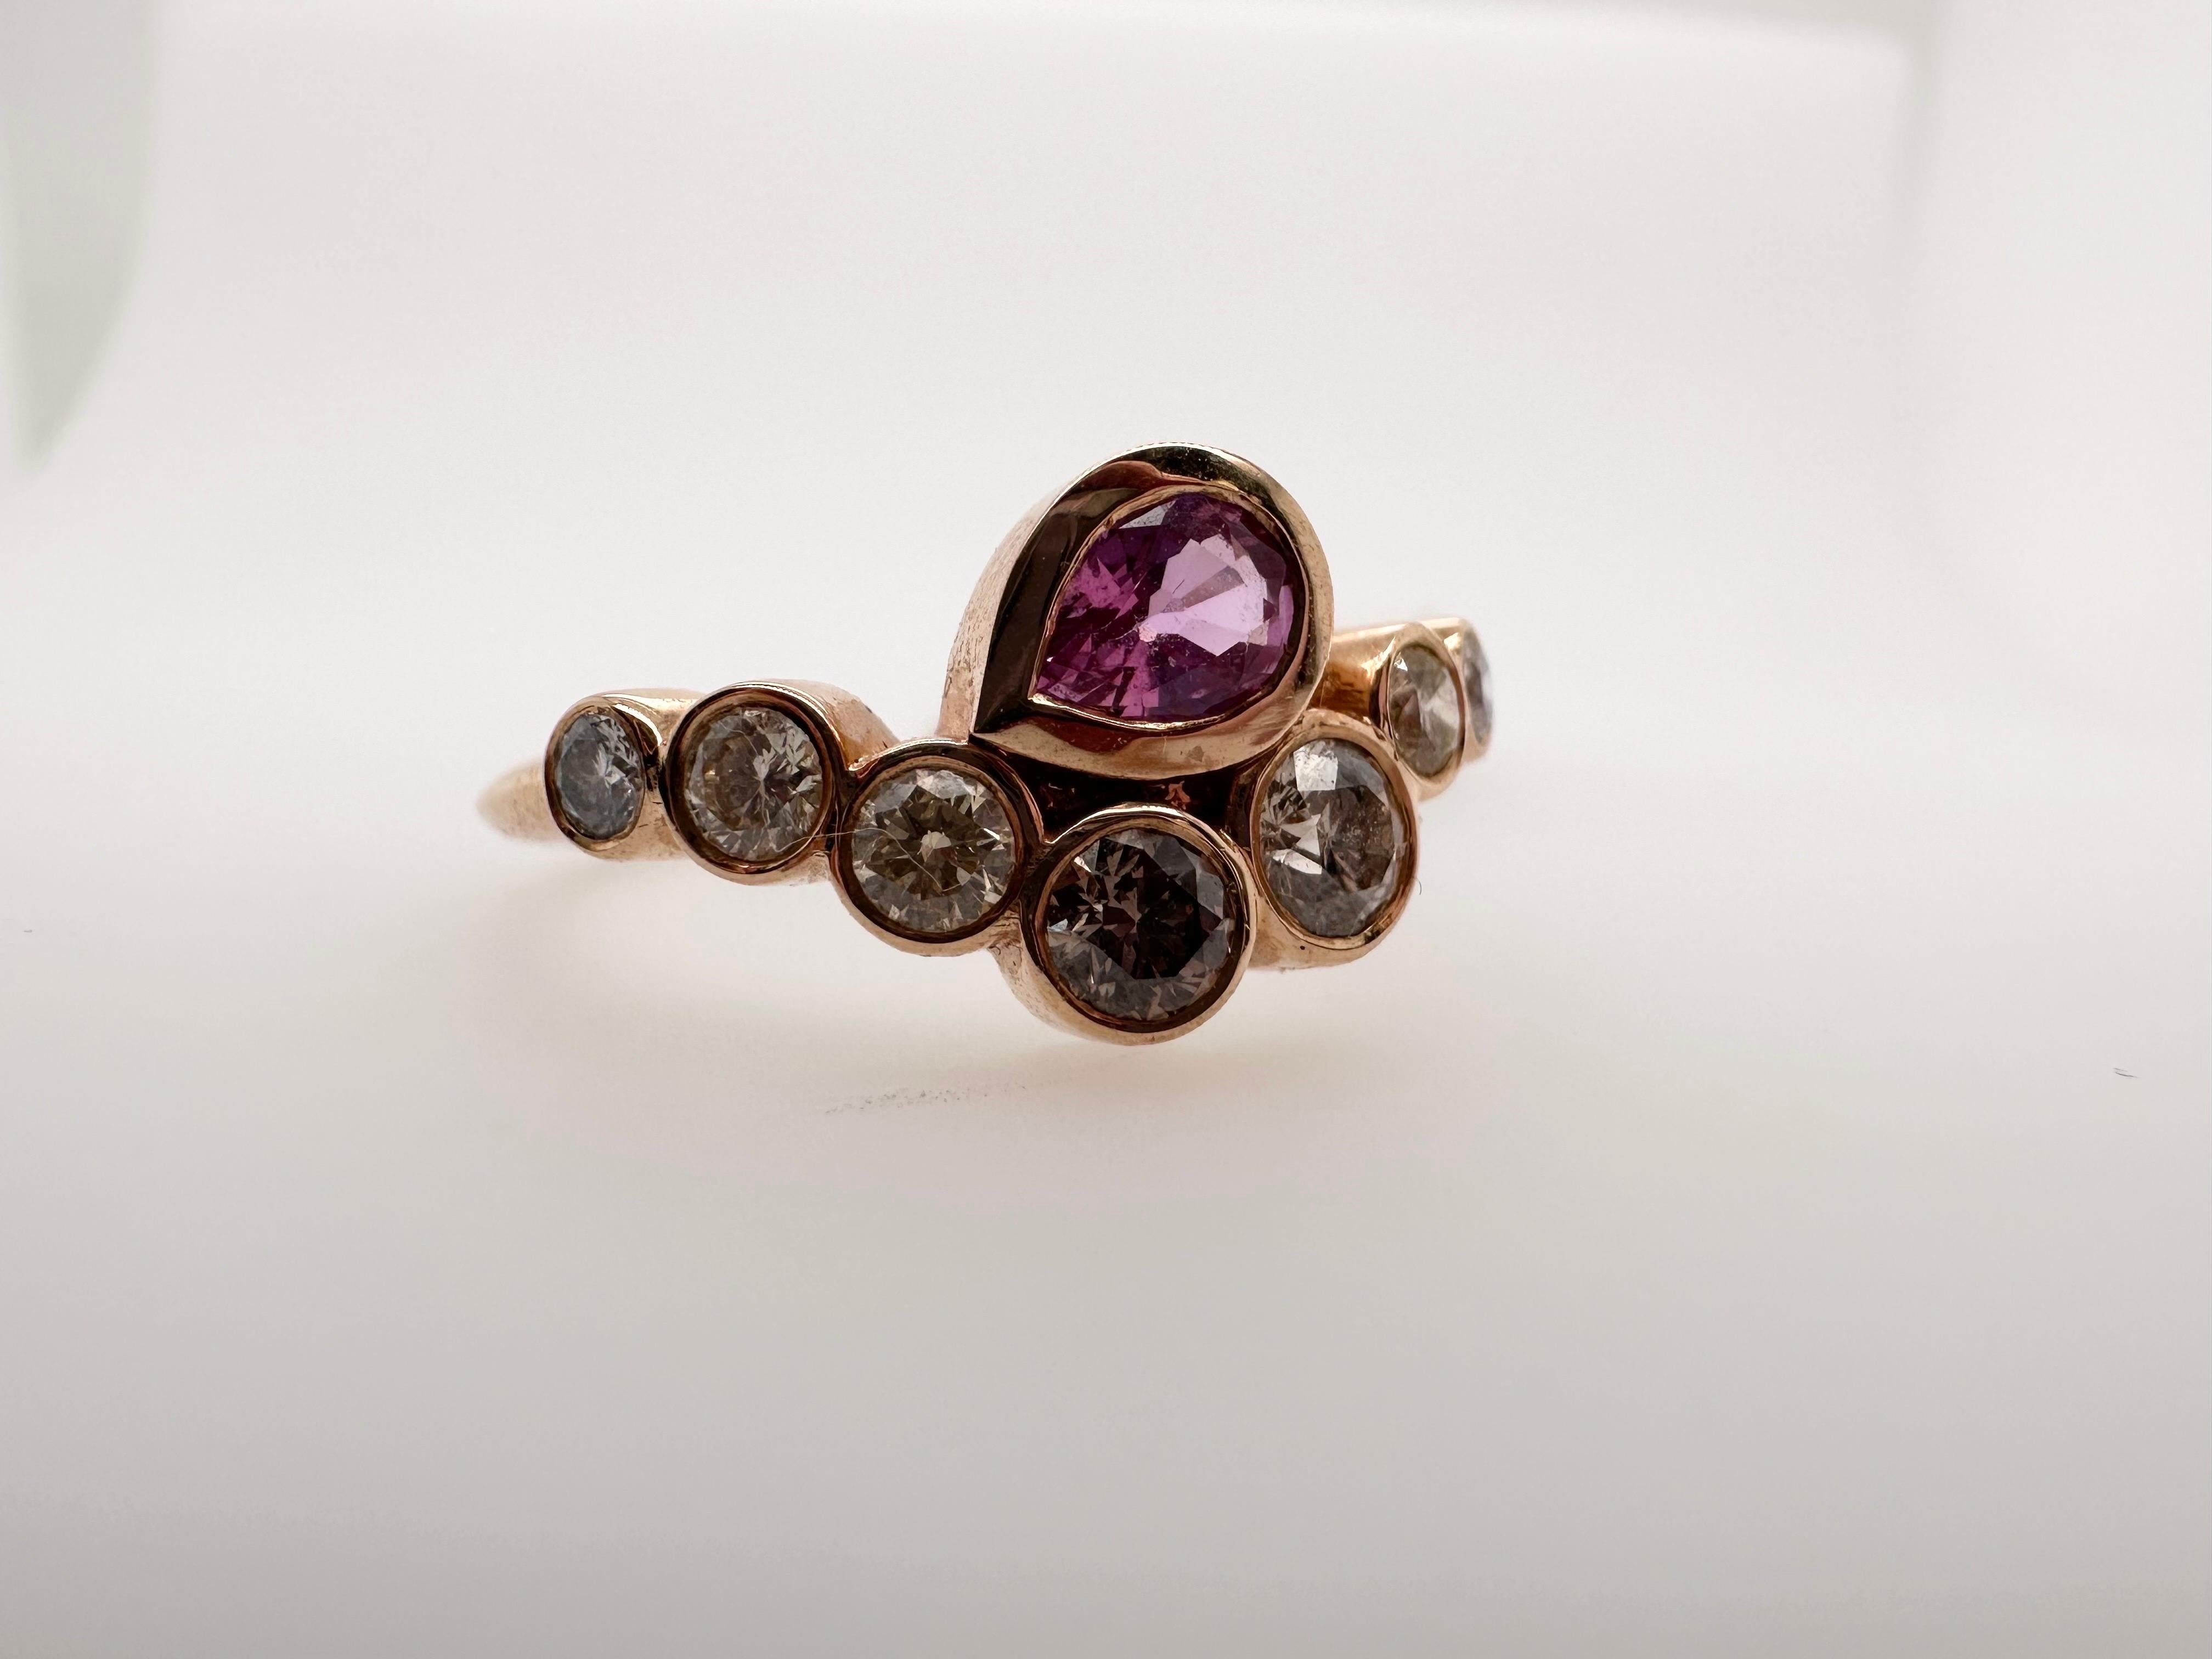 Exquisite Pink Sapphire and Diamond ring in 14KT rose gold, made in a contemporary evil eye style, very interesting artistic vision of the ring. 

Metal Type: 14KT

Natural Sapphire(s):
Color: Pink
Cut: Pear
Carat: 0.55ct
Clarity: Slightly